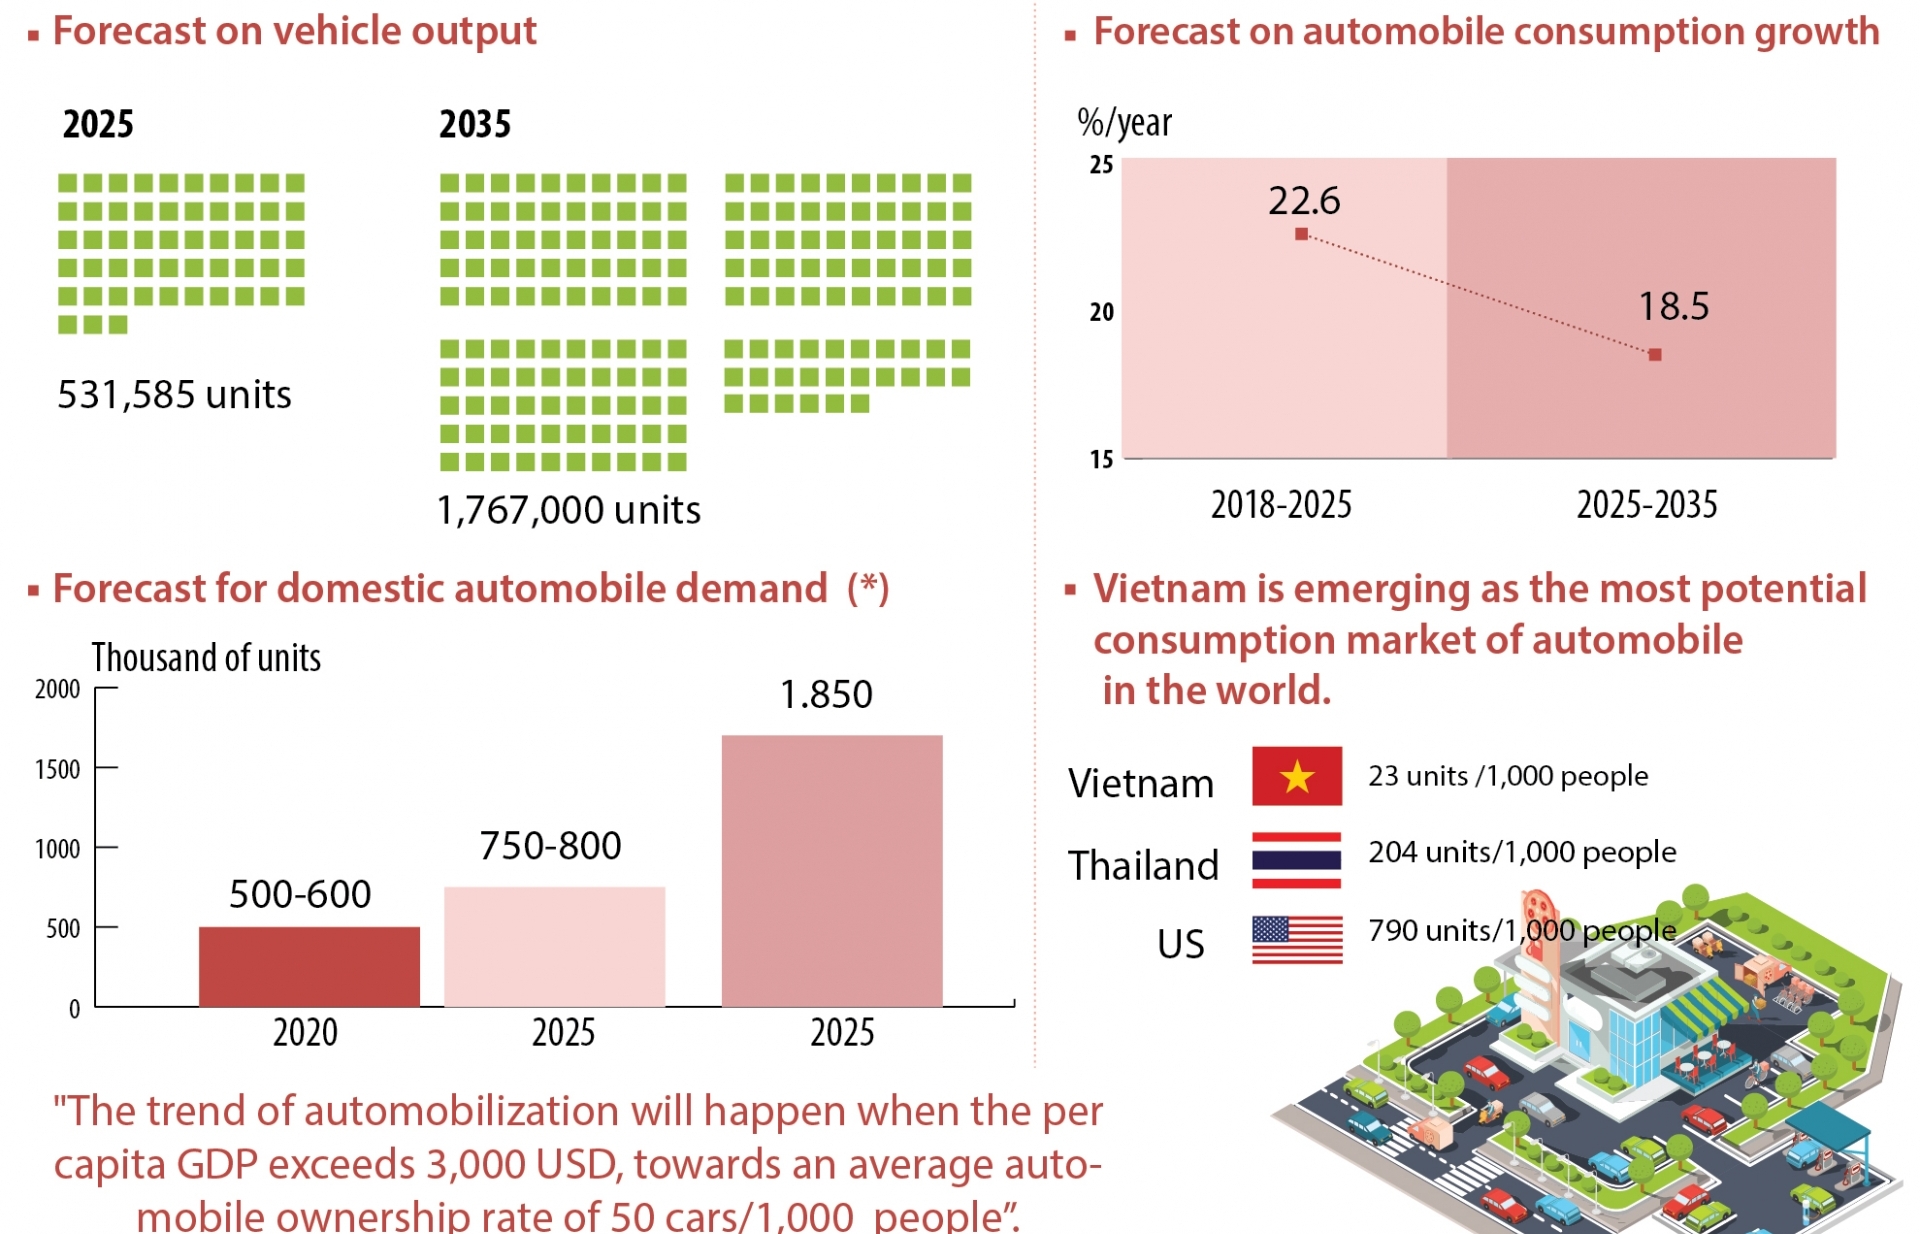 Forecast on automobile consumption growth to 2025